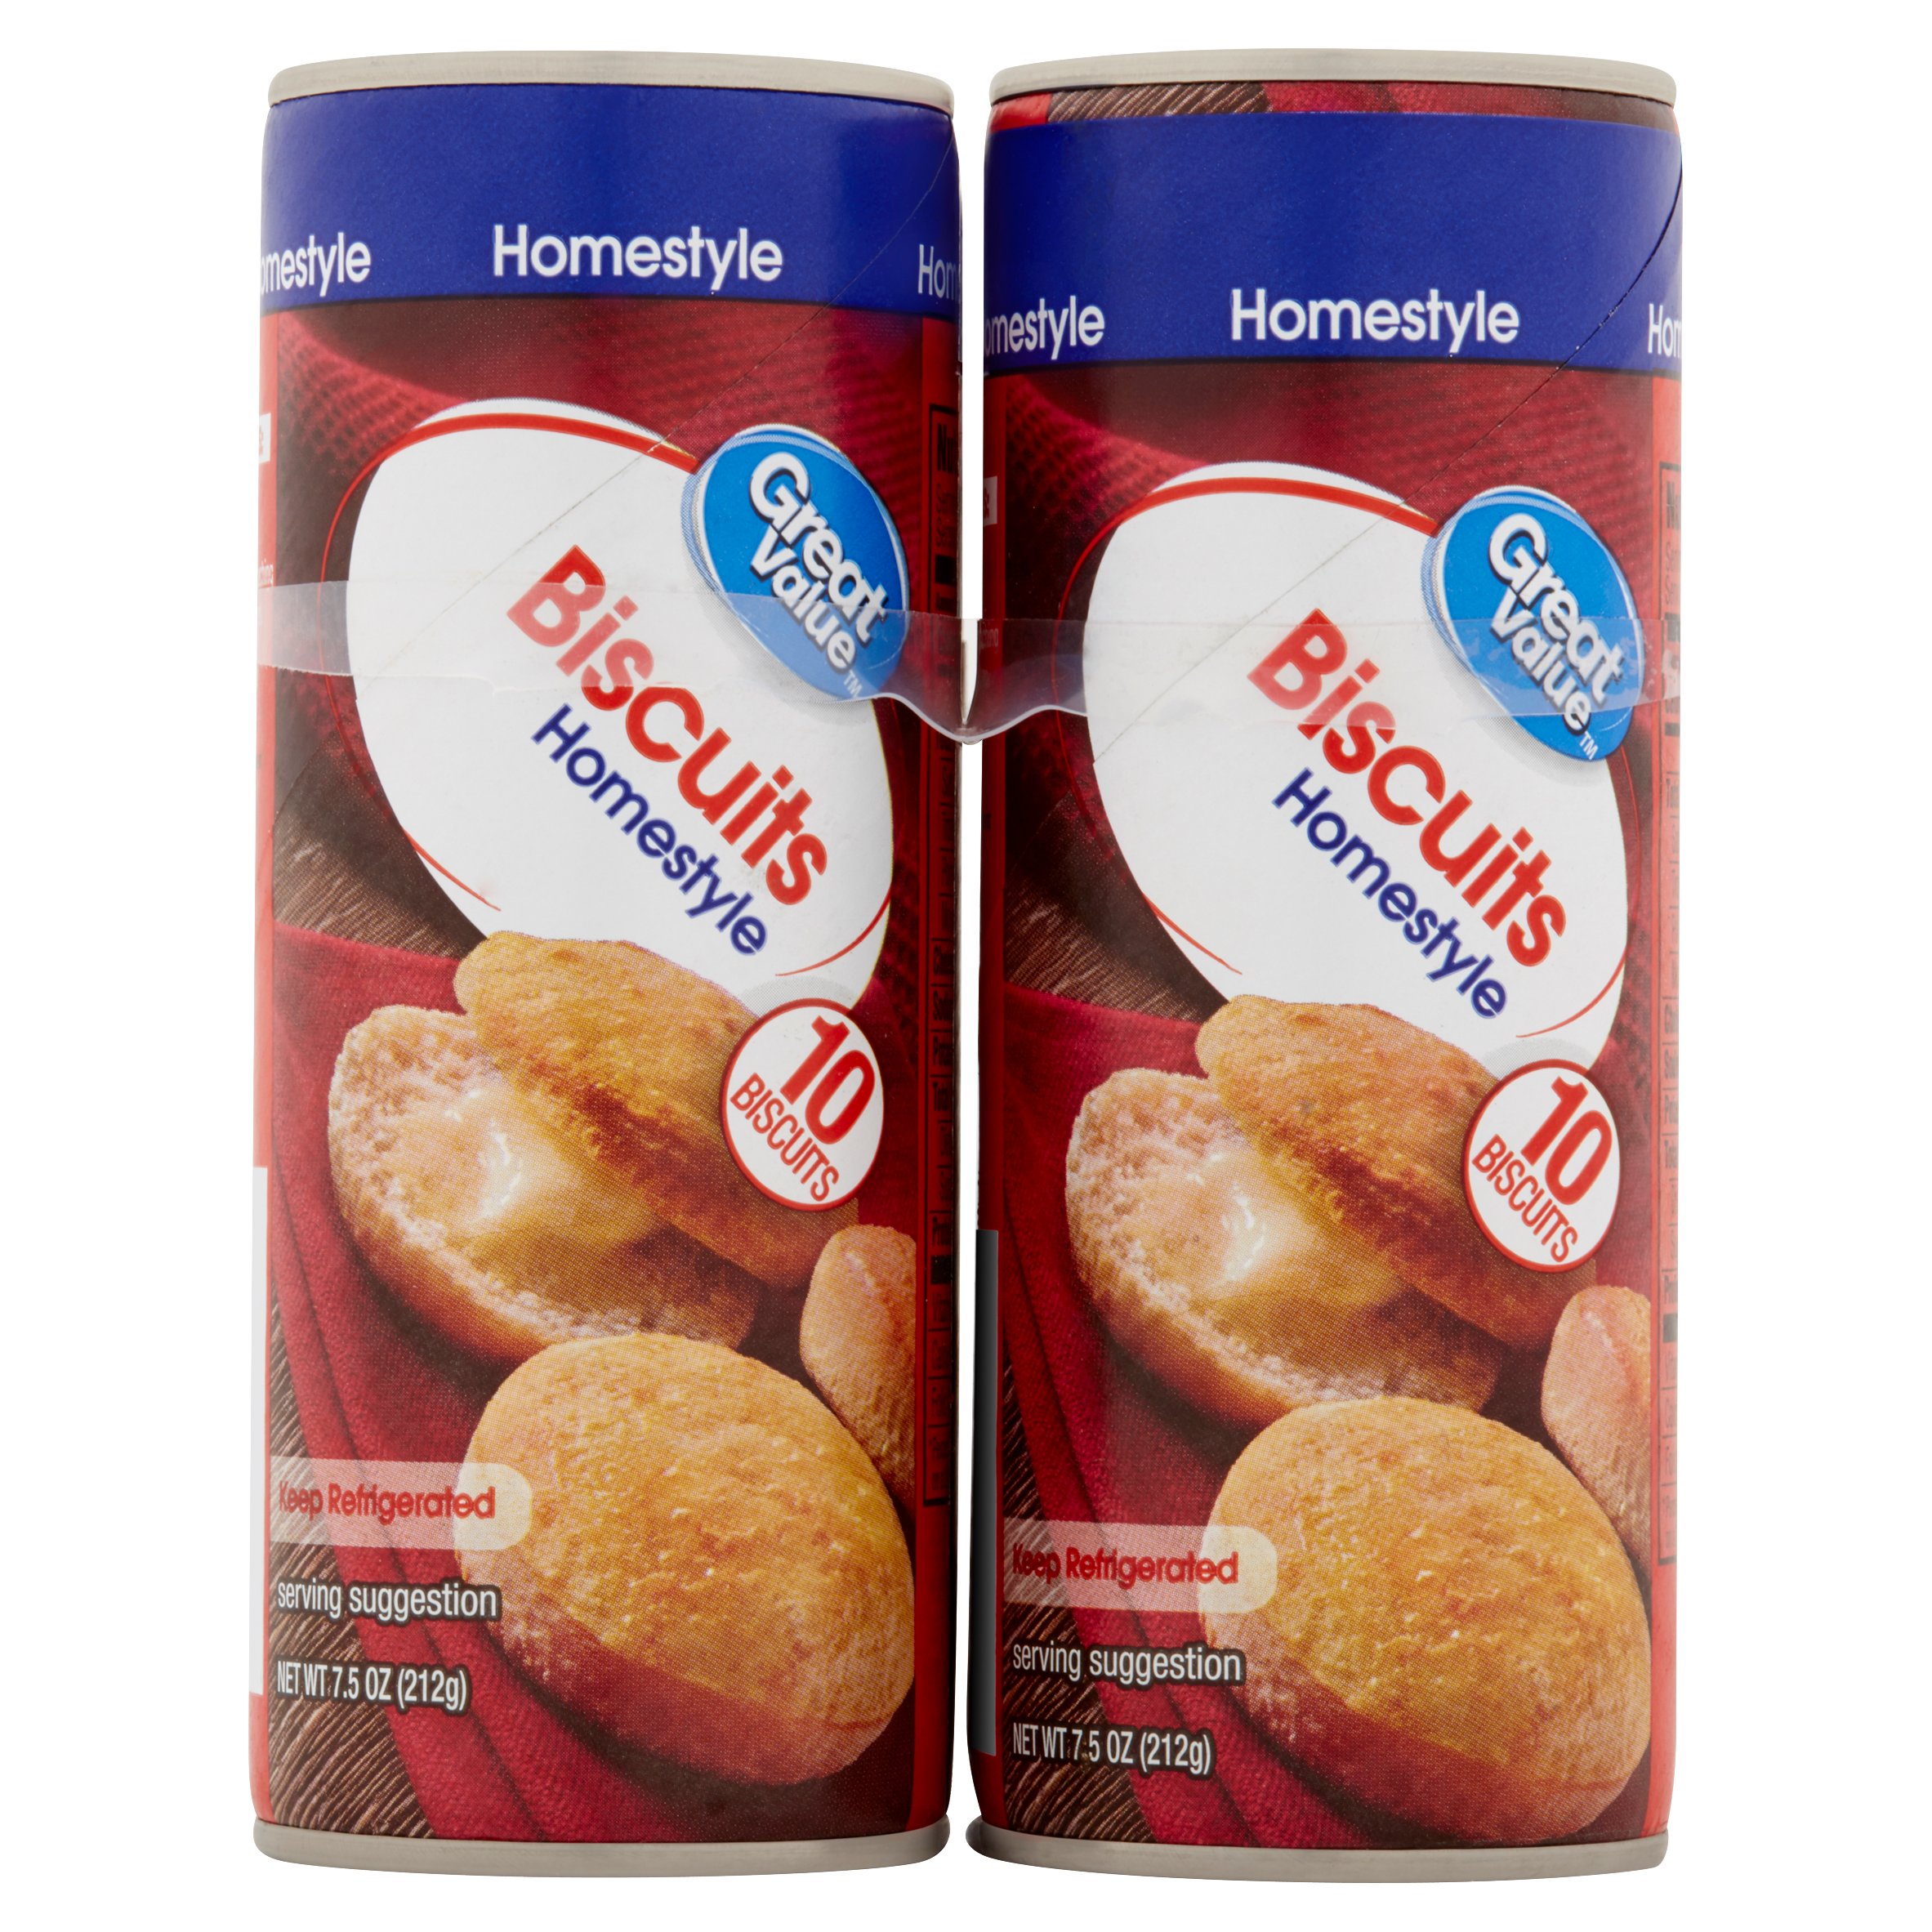 Great Value, Homestyle Biscuits, 7.5 Oz., 4 Count Image